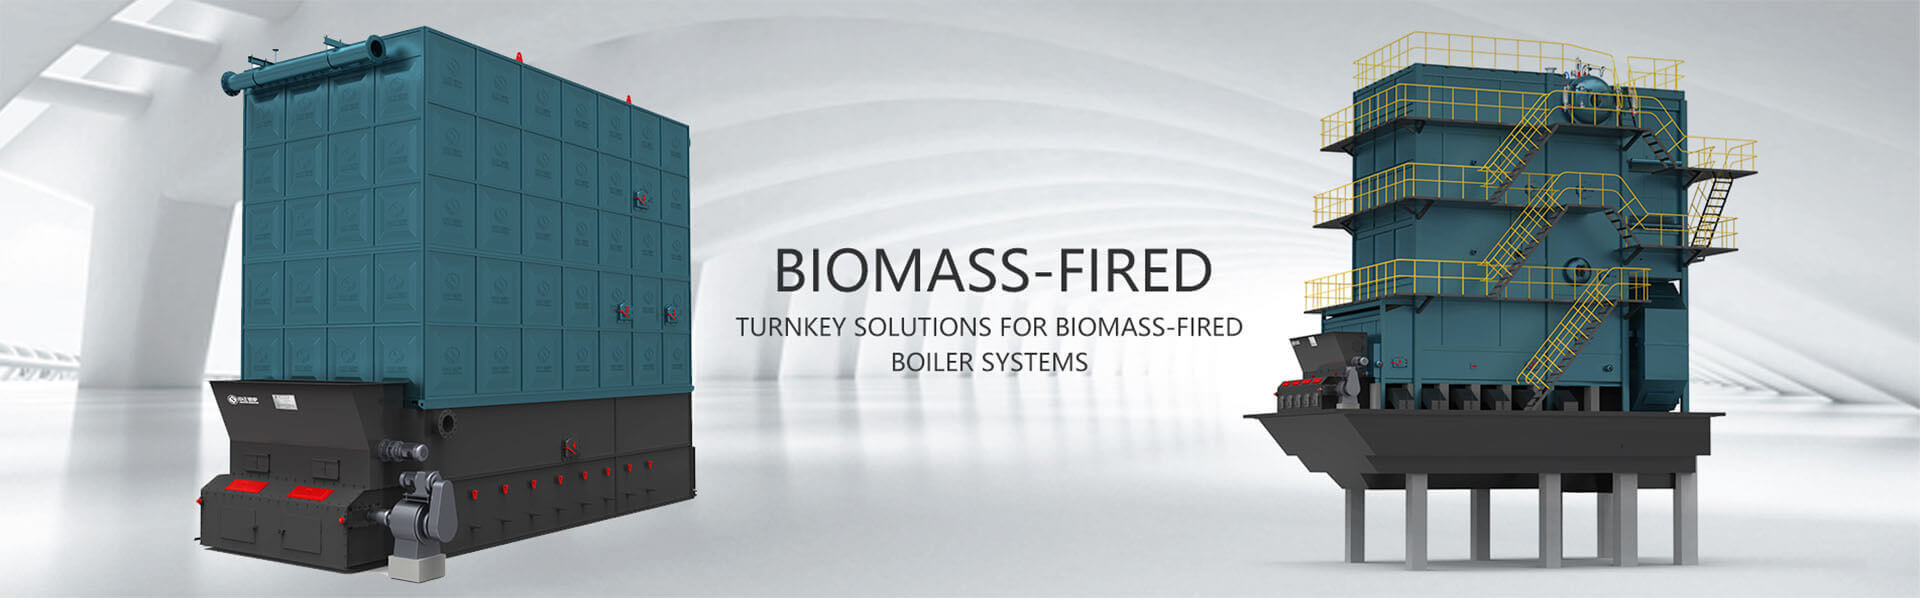 Advantages of biomass boilers